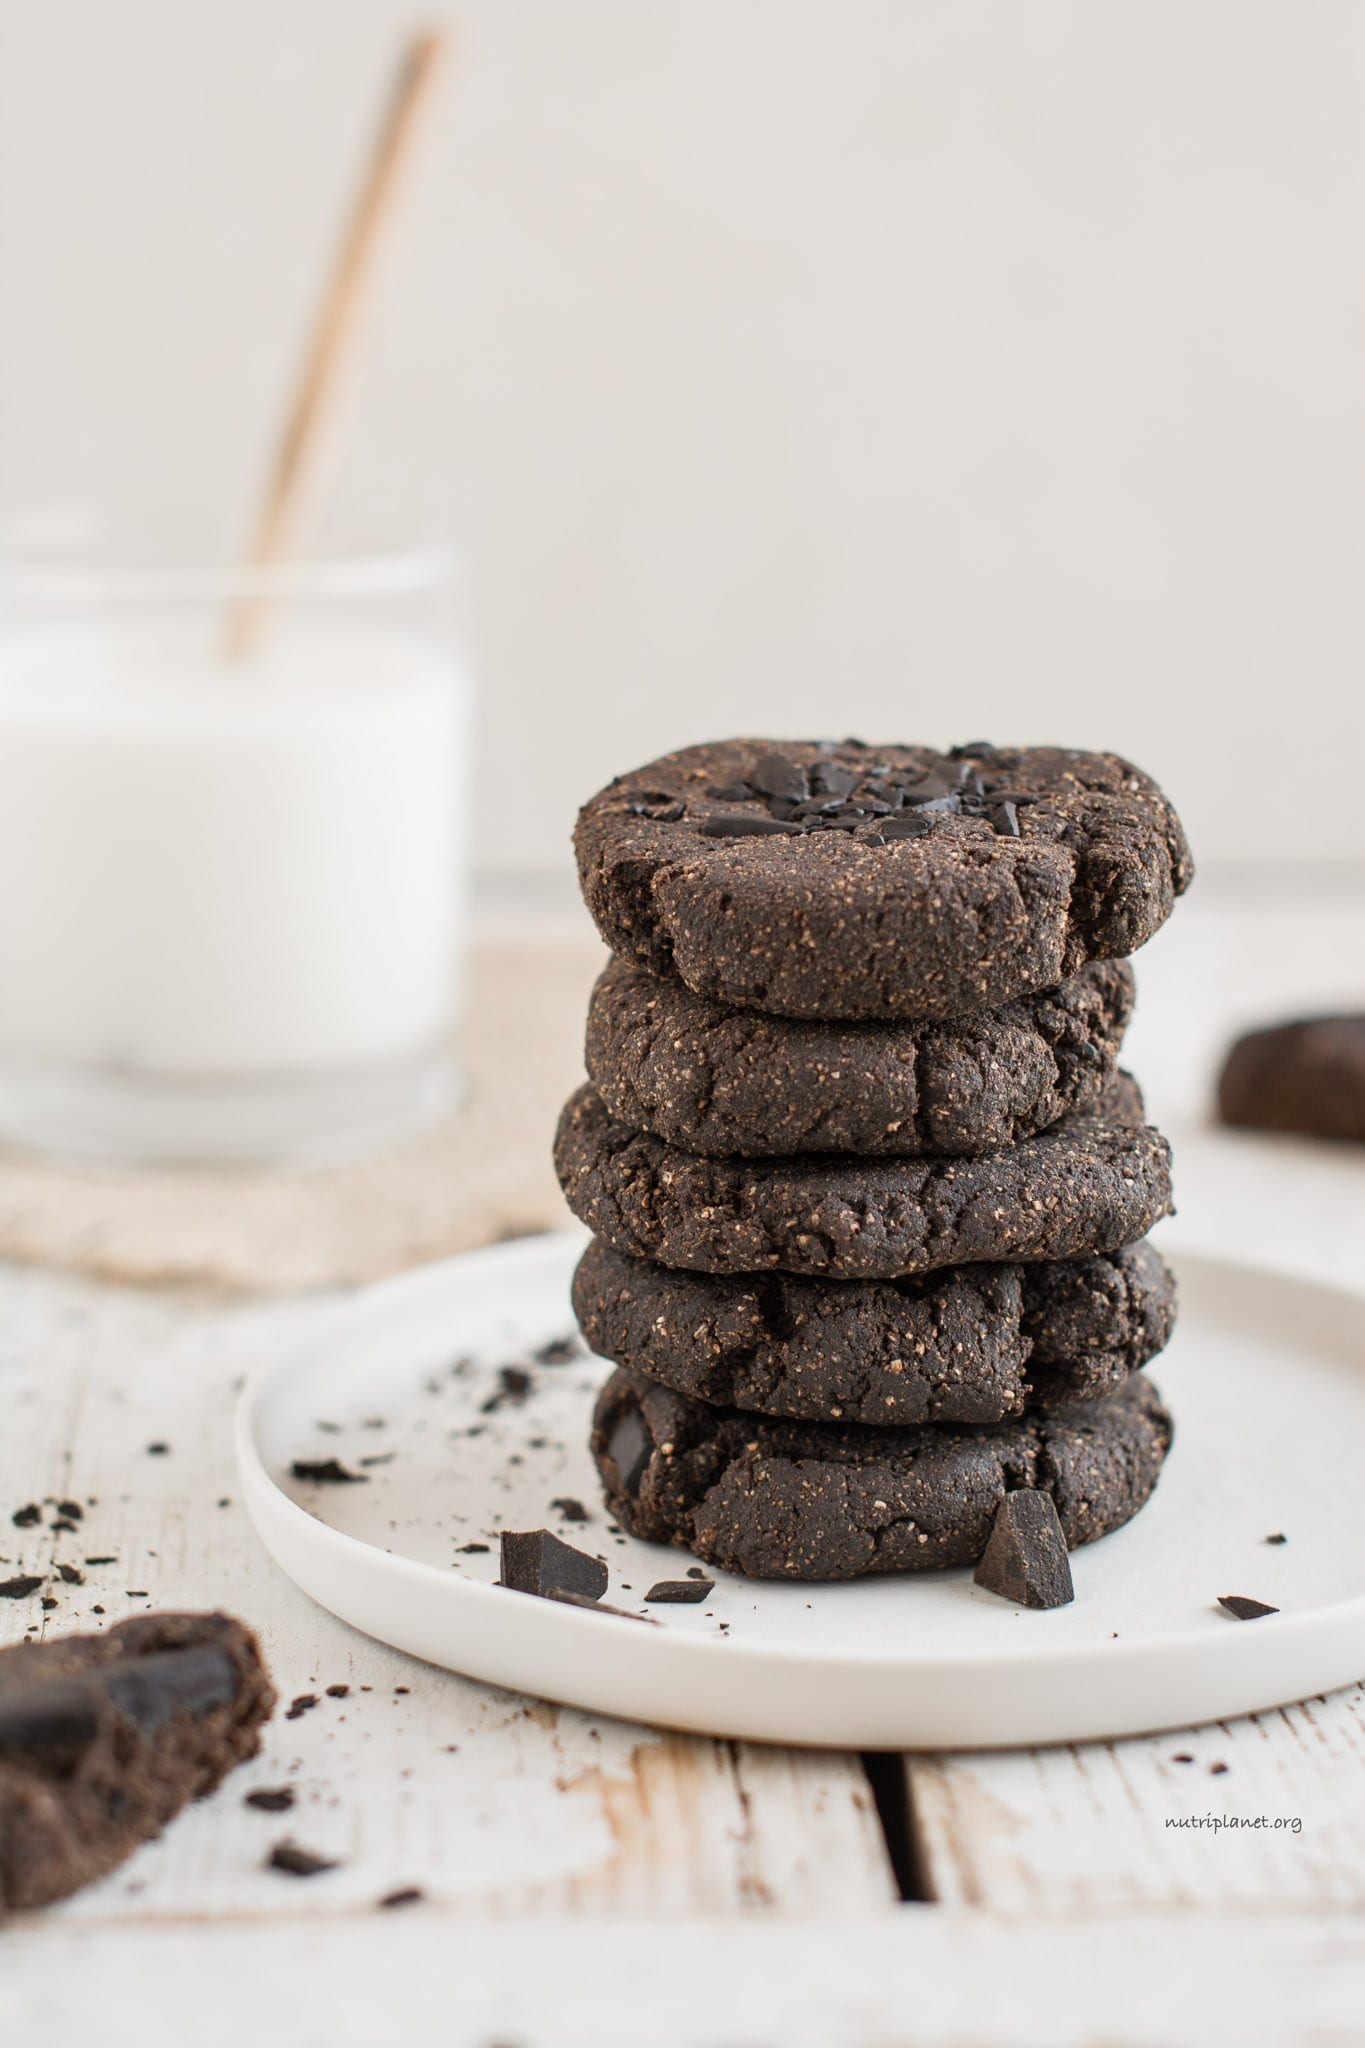 Vegan Paleo Chocolate Chip Cookies without Cocoa